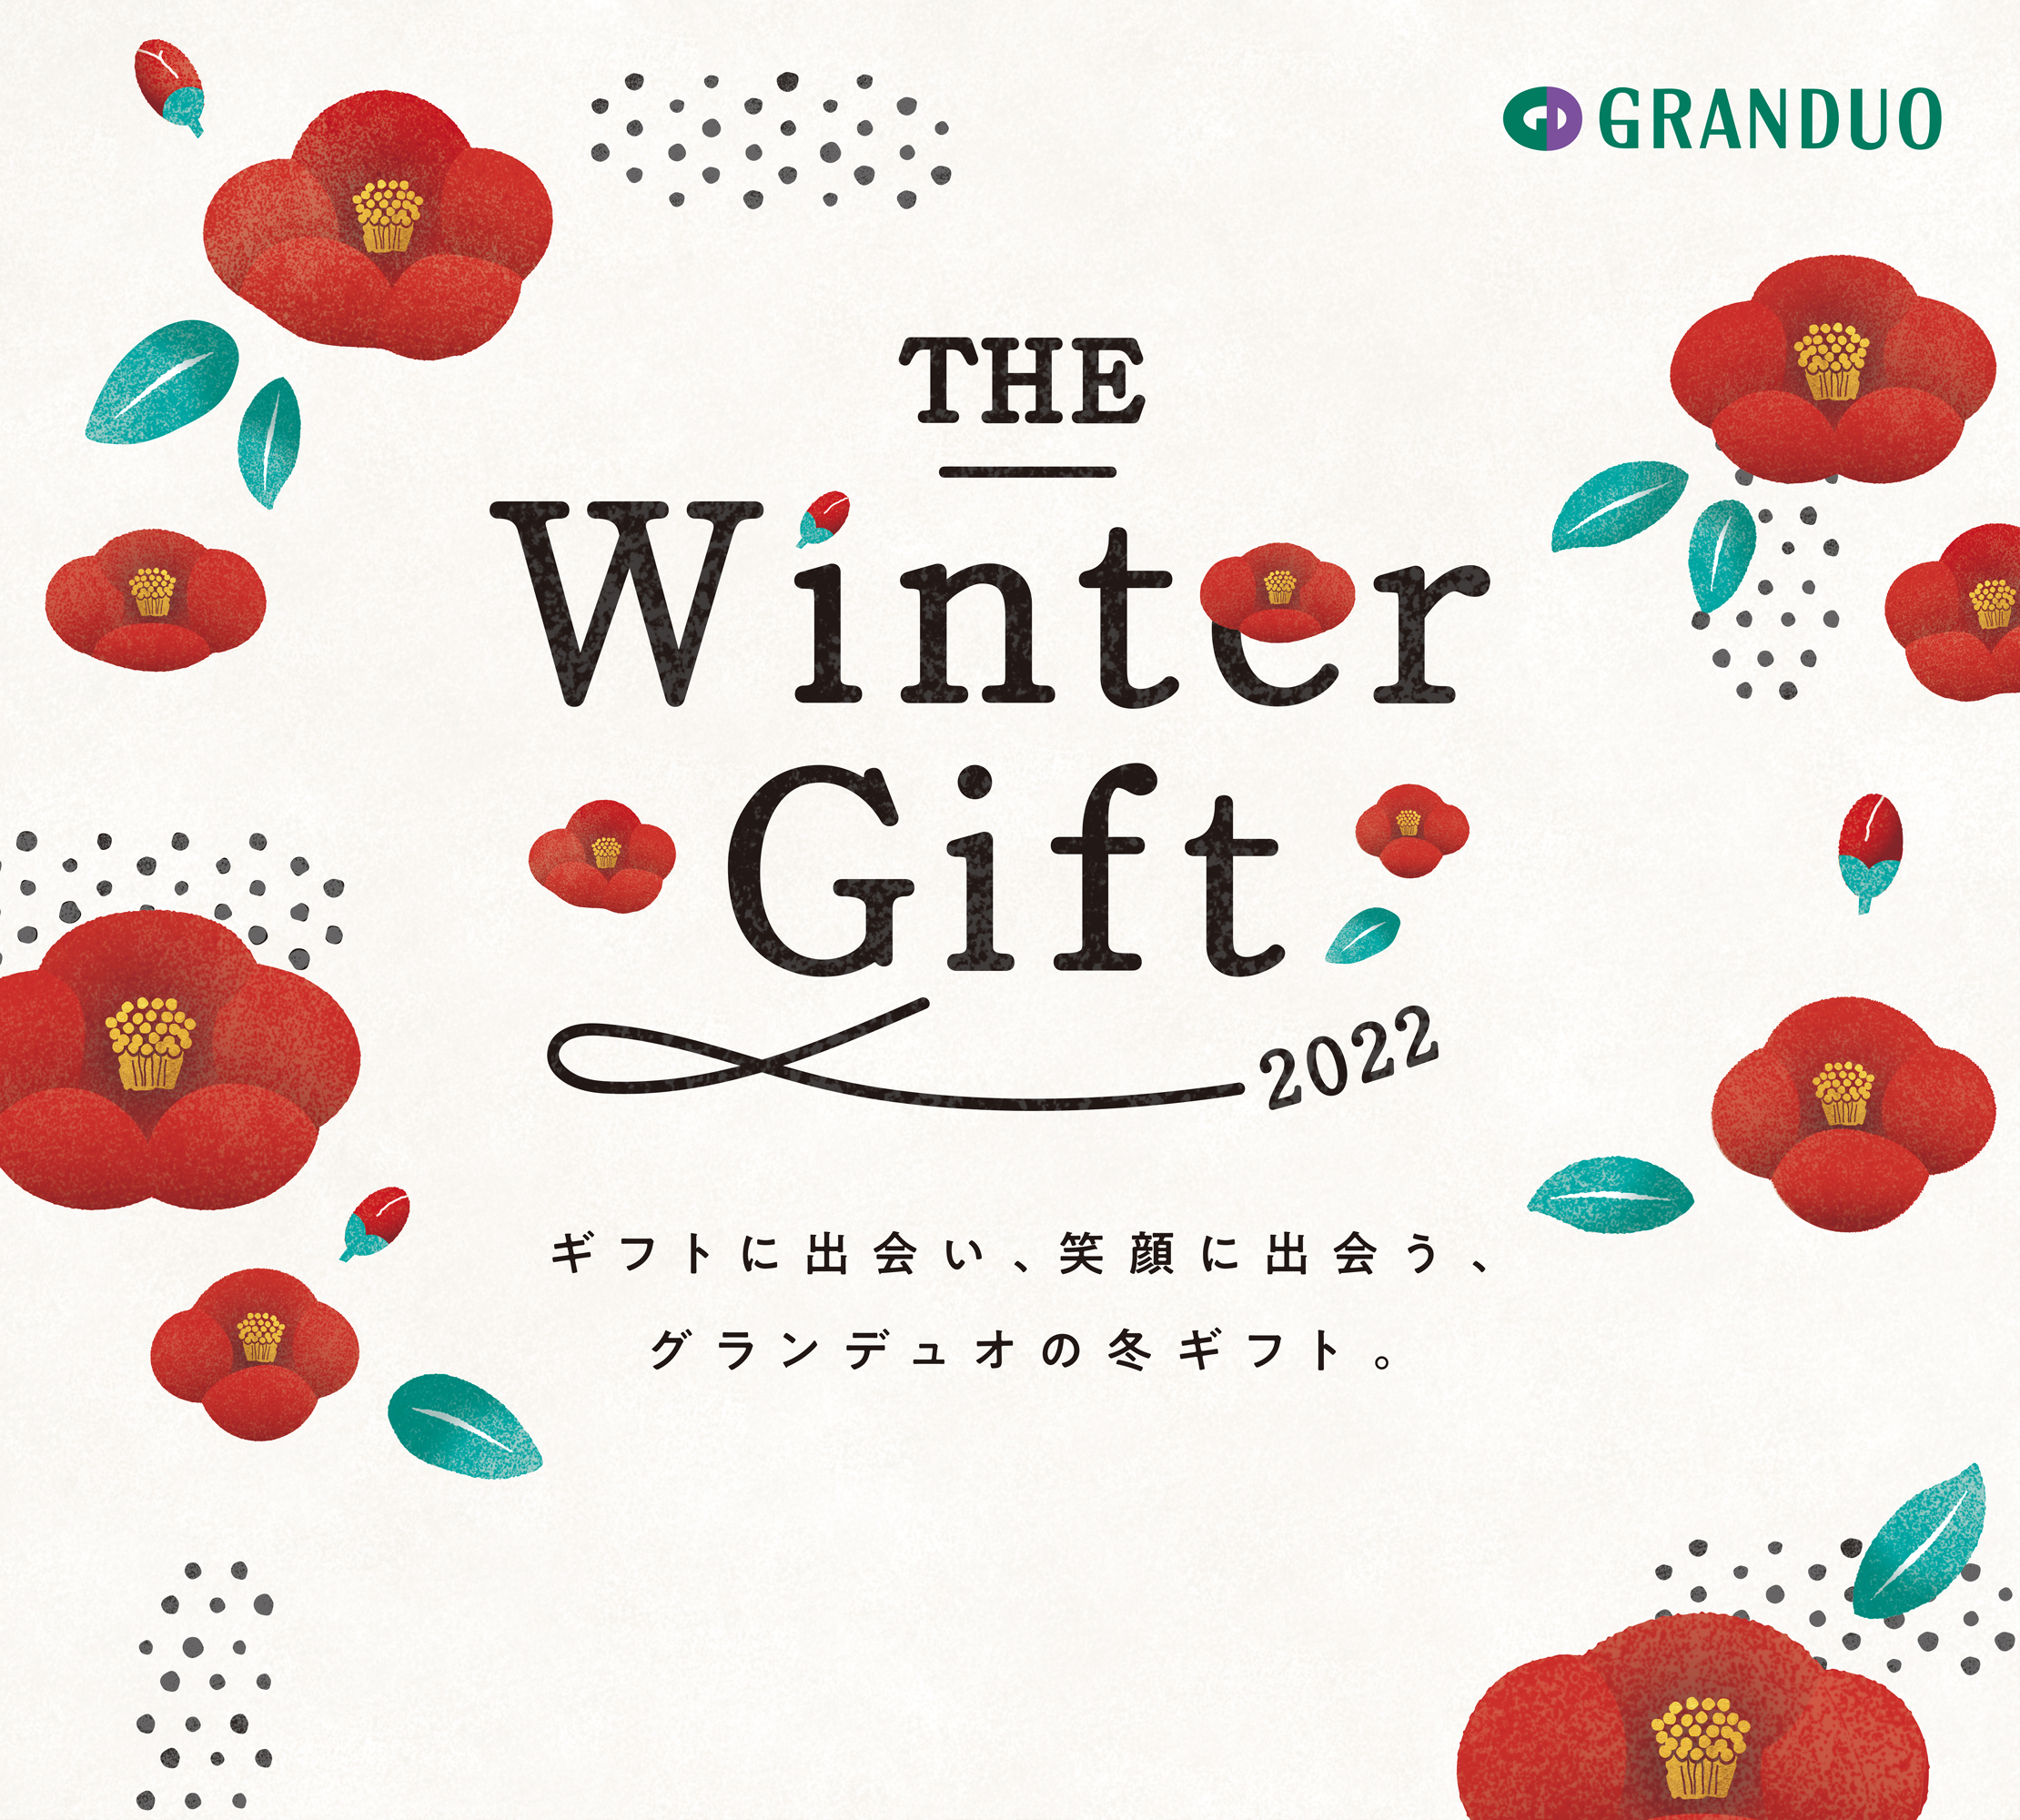 THE Winter Gift 2022